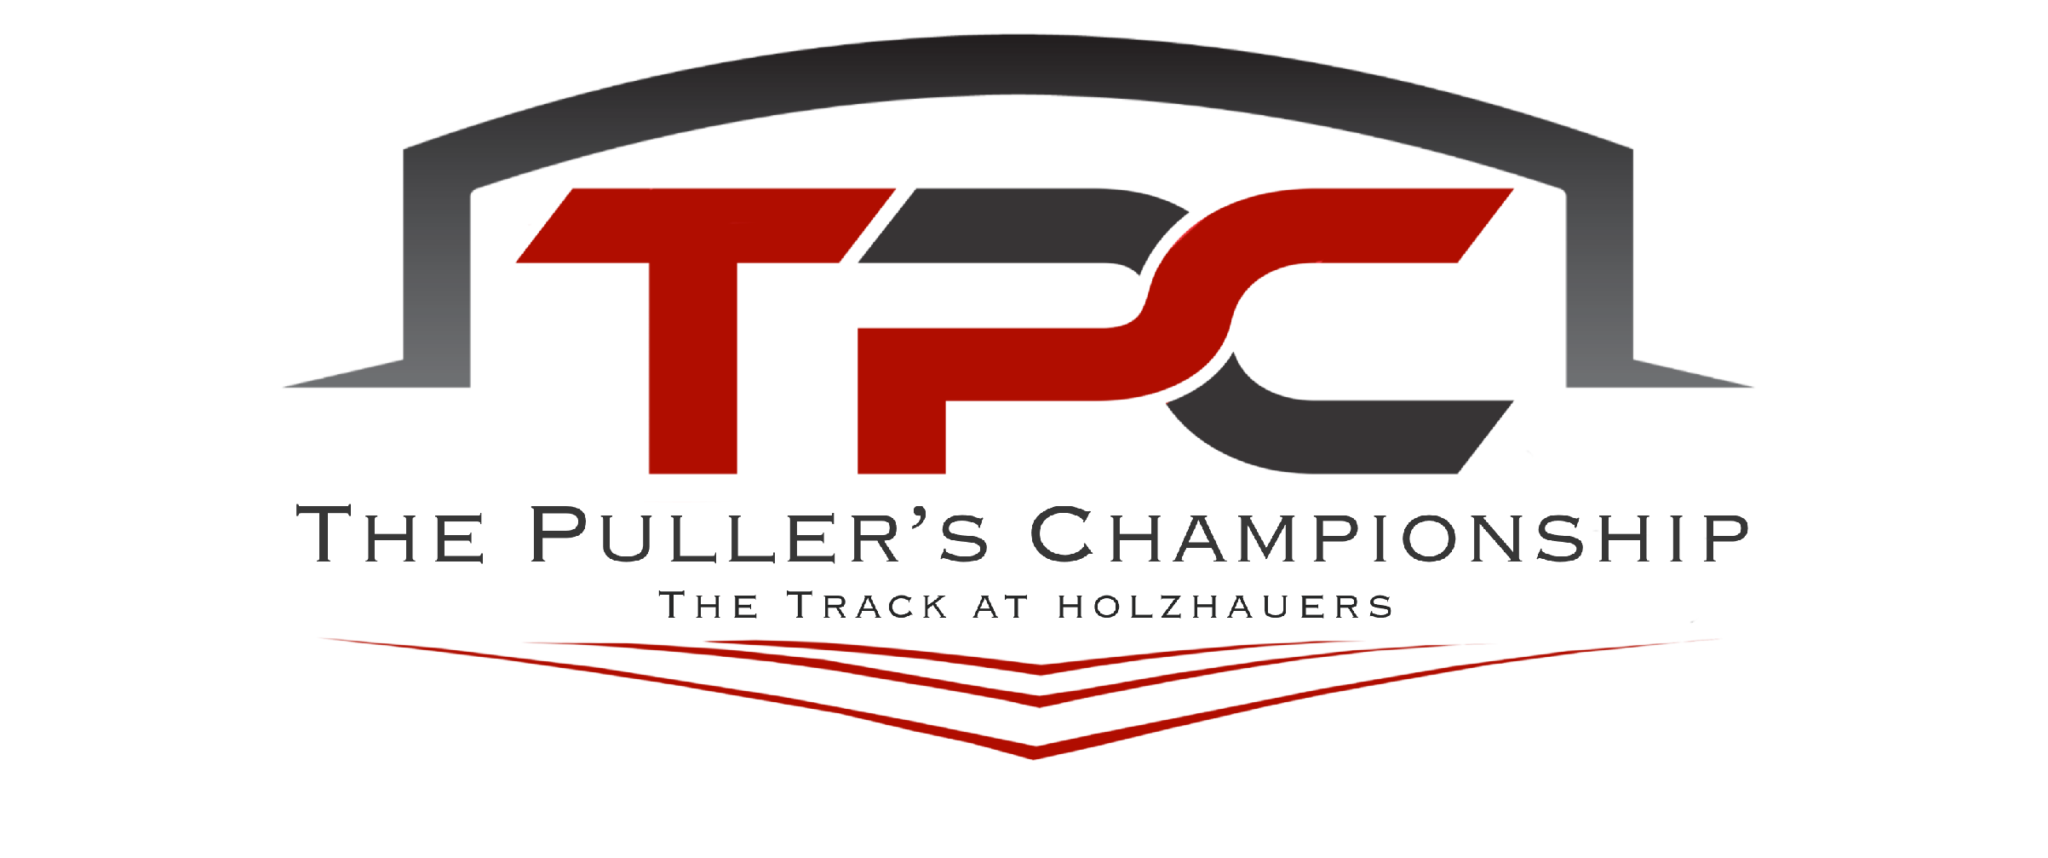 The Pullers Championship